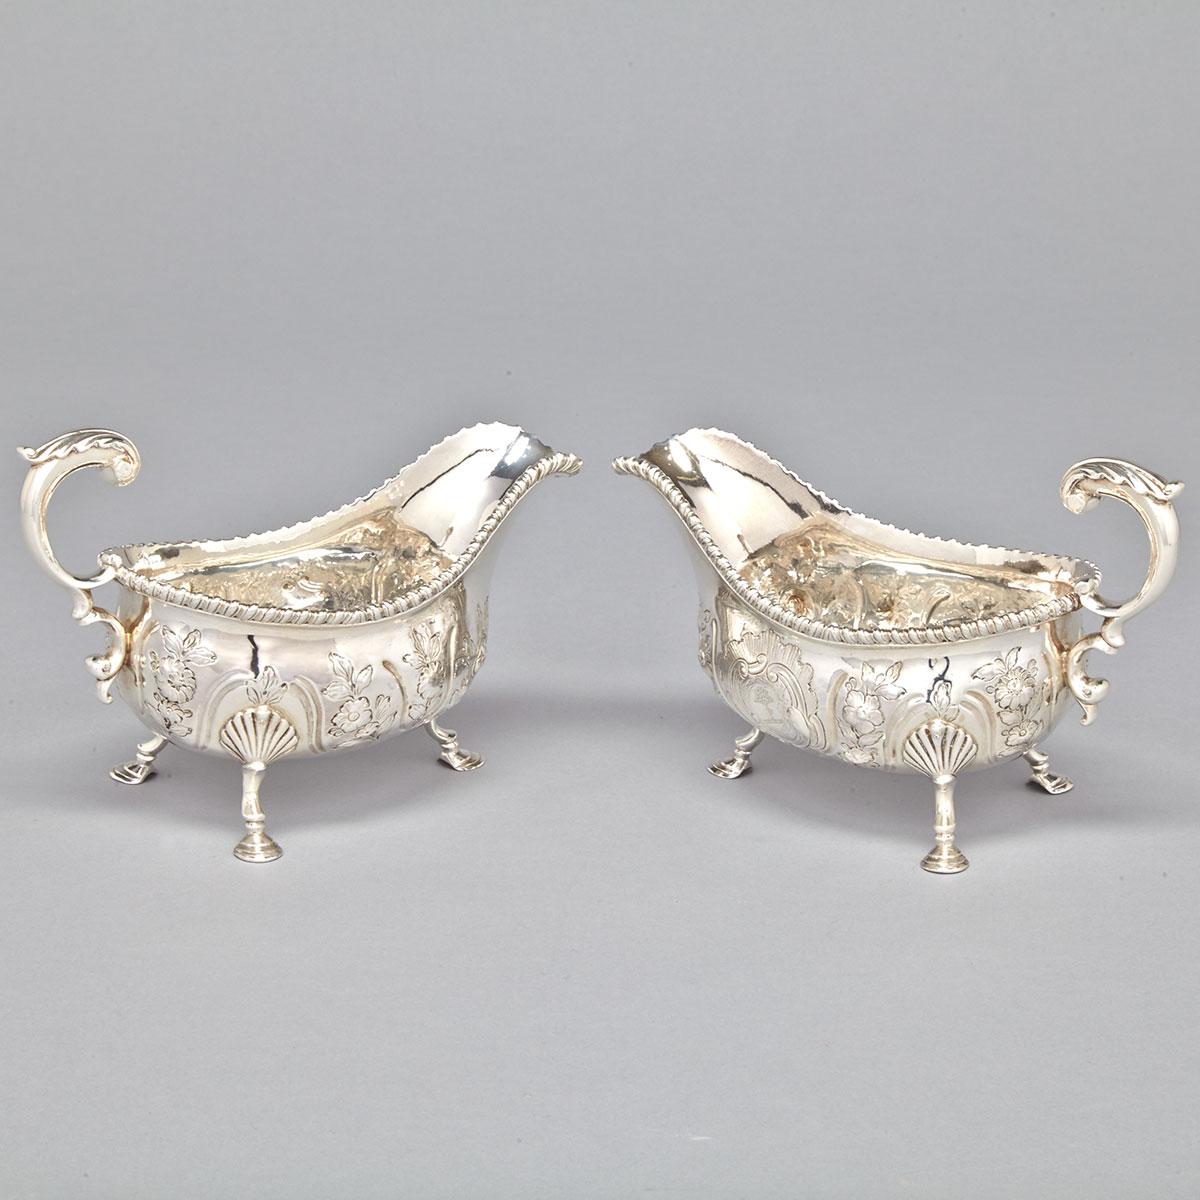 Pair of George III Silver Oval Bellied Sauce Boats, William Skeen, London, 1762